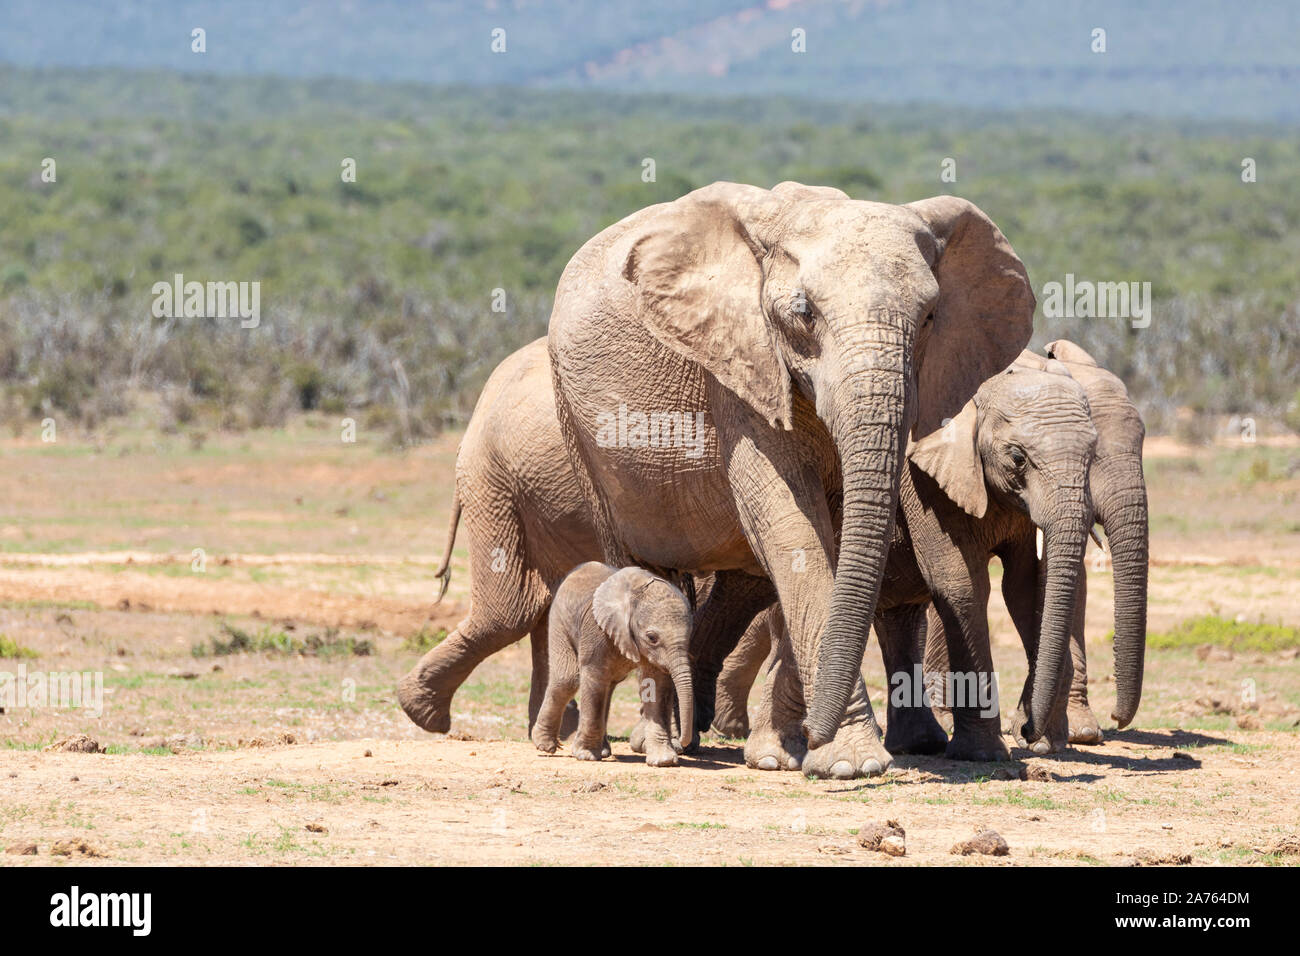 African Elephants (Loxodonta africana) with matriach (mother) and baby with three juveniles, Addo Elephant National Park, eastern Cape, South Africa Stock Photo